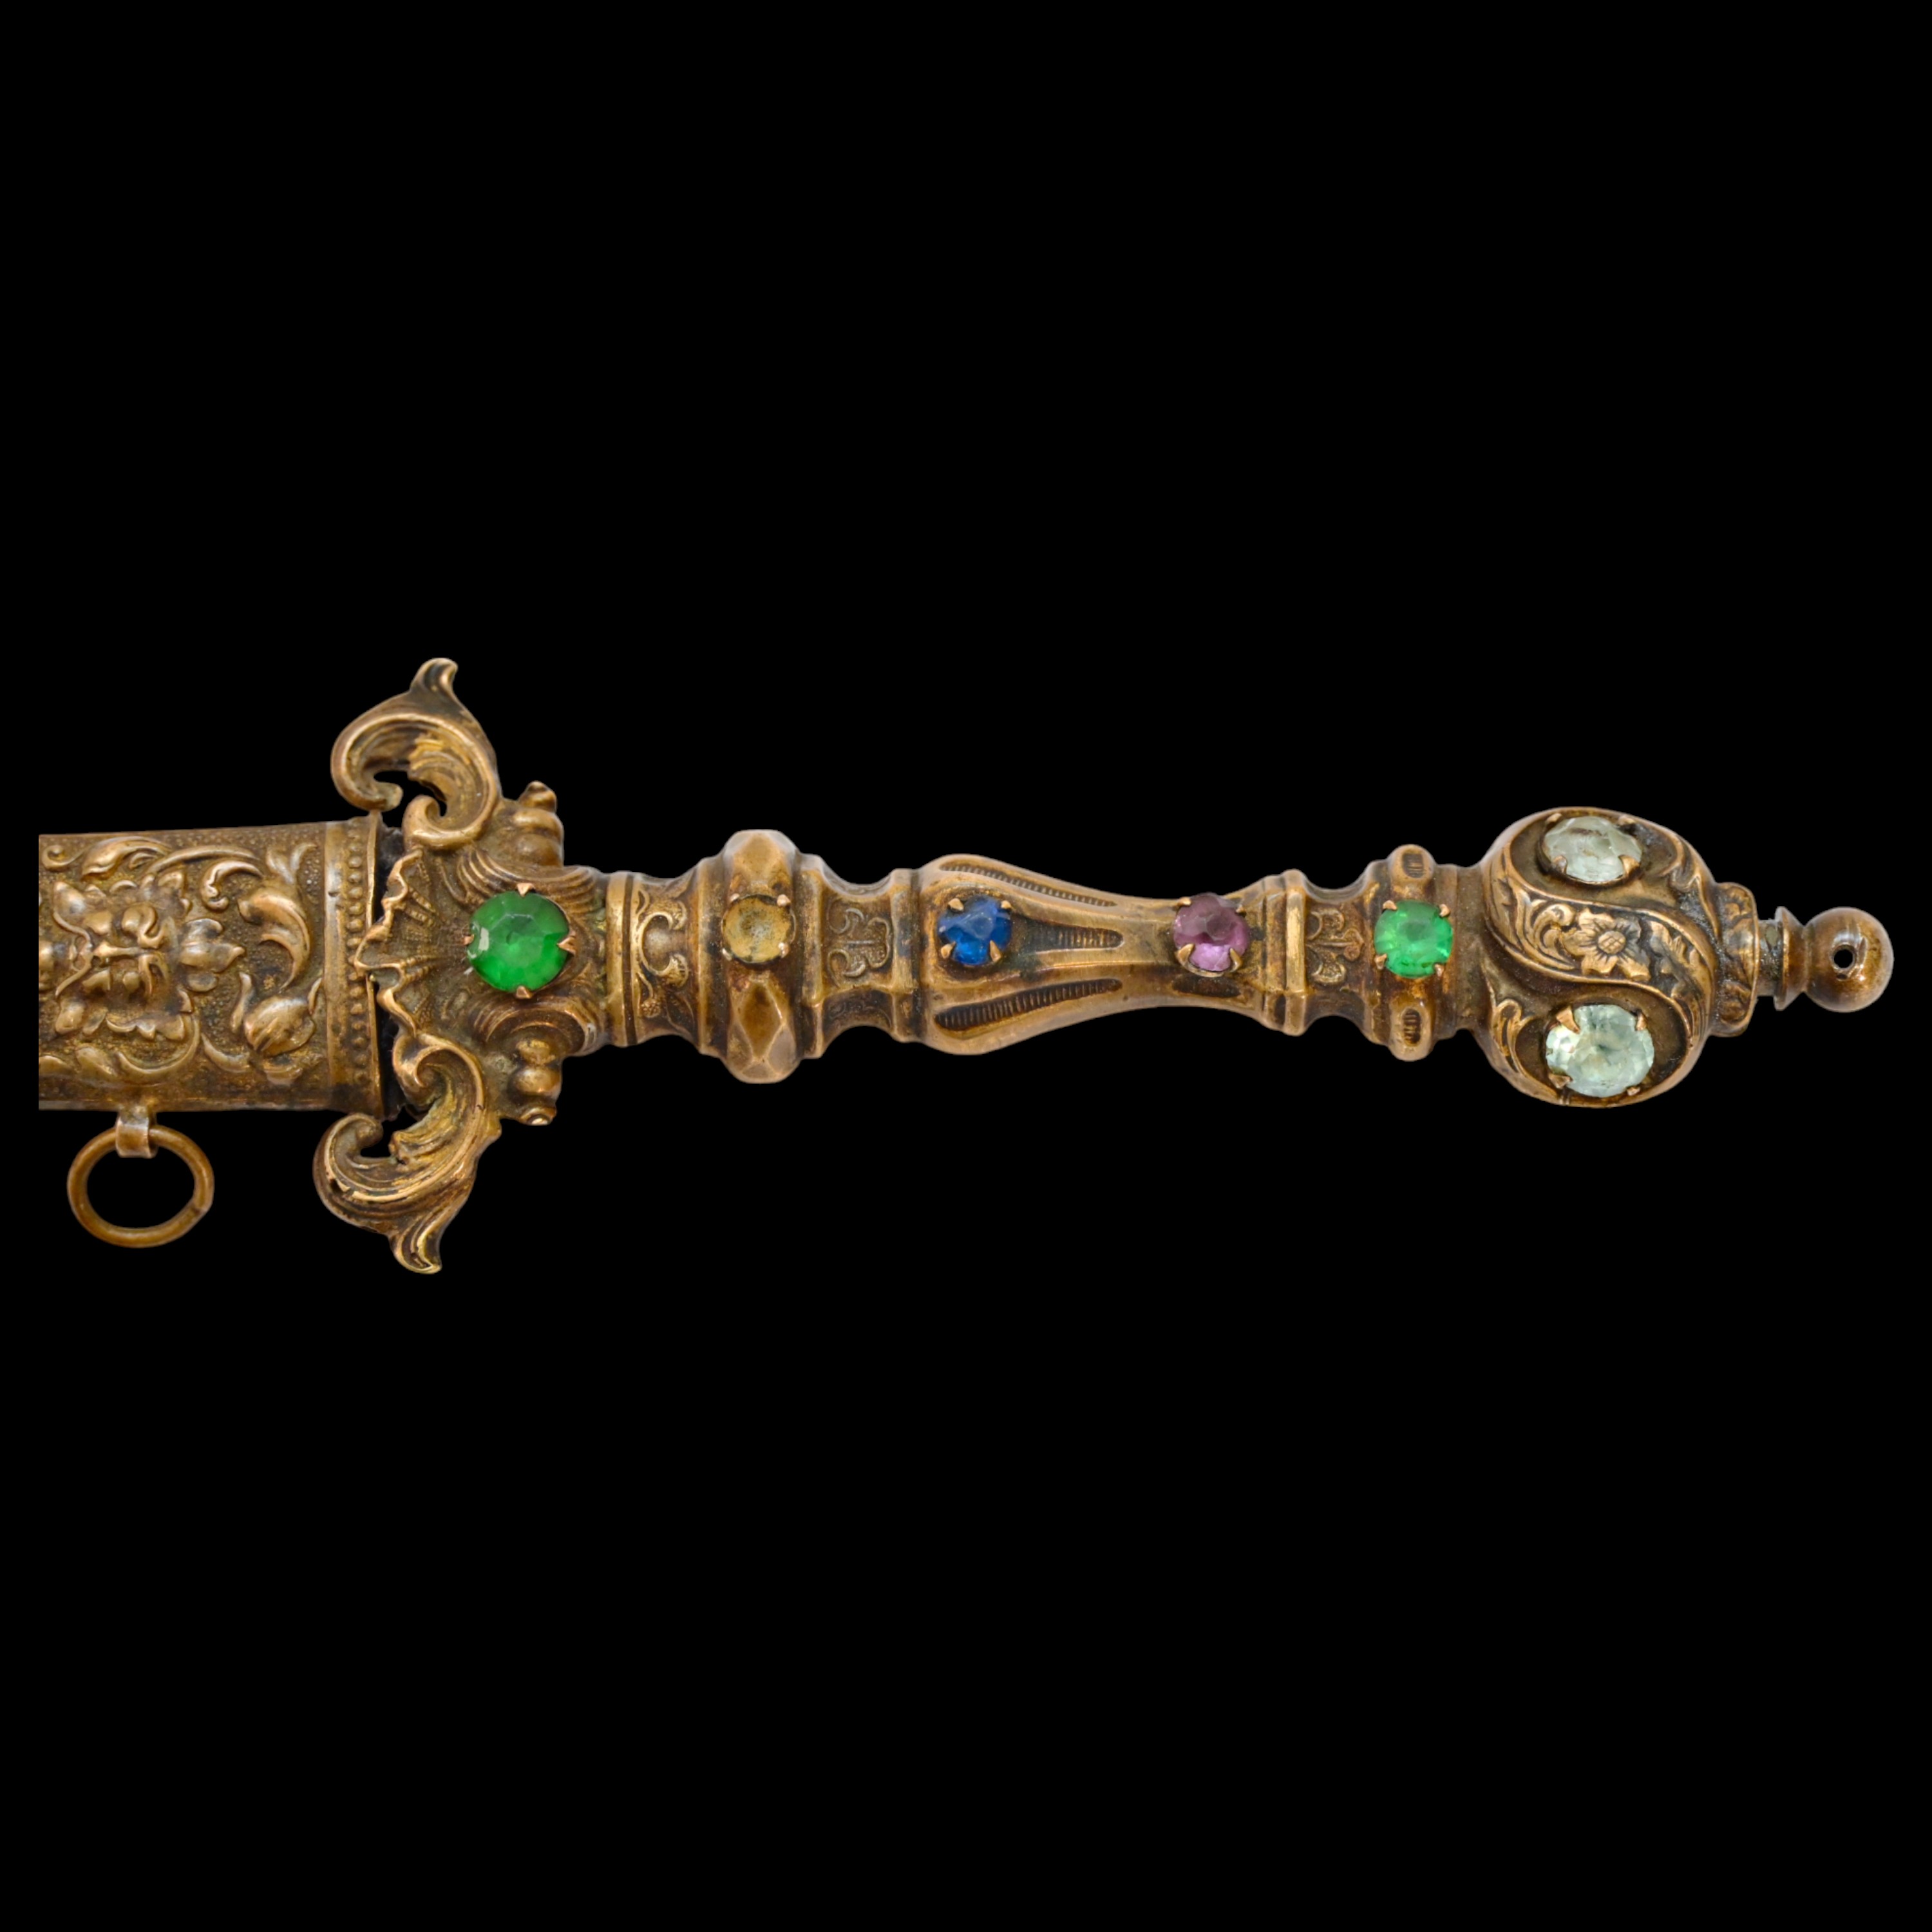 A Very high quality Dagger Renaissance Style Brass with inlaid colored stones, 19th century. - Image 3 of 9